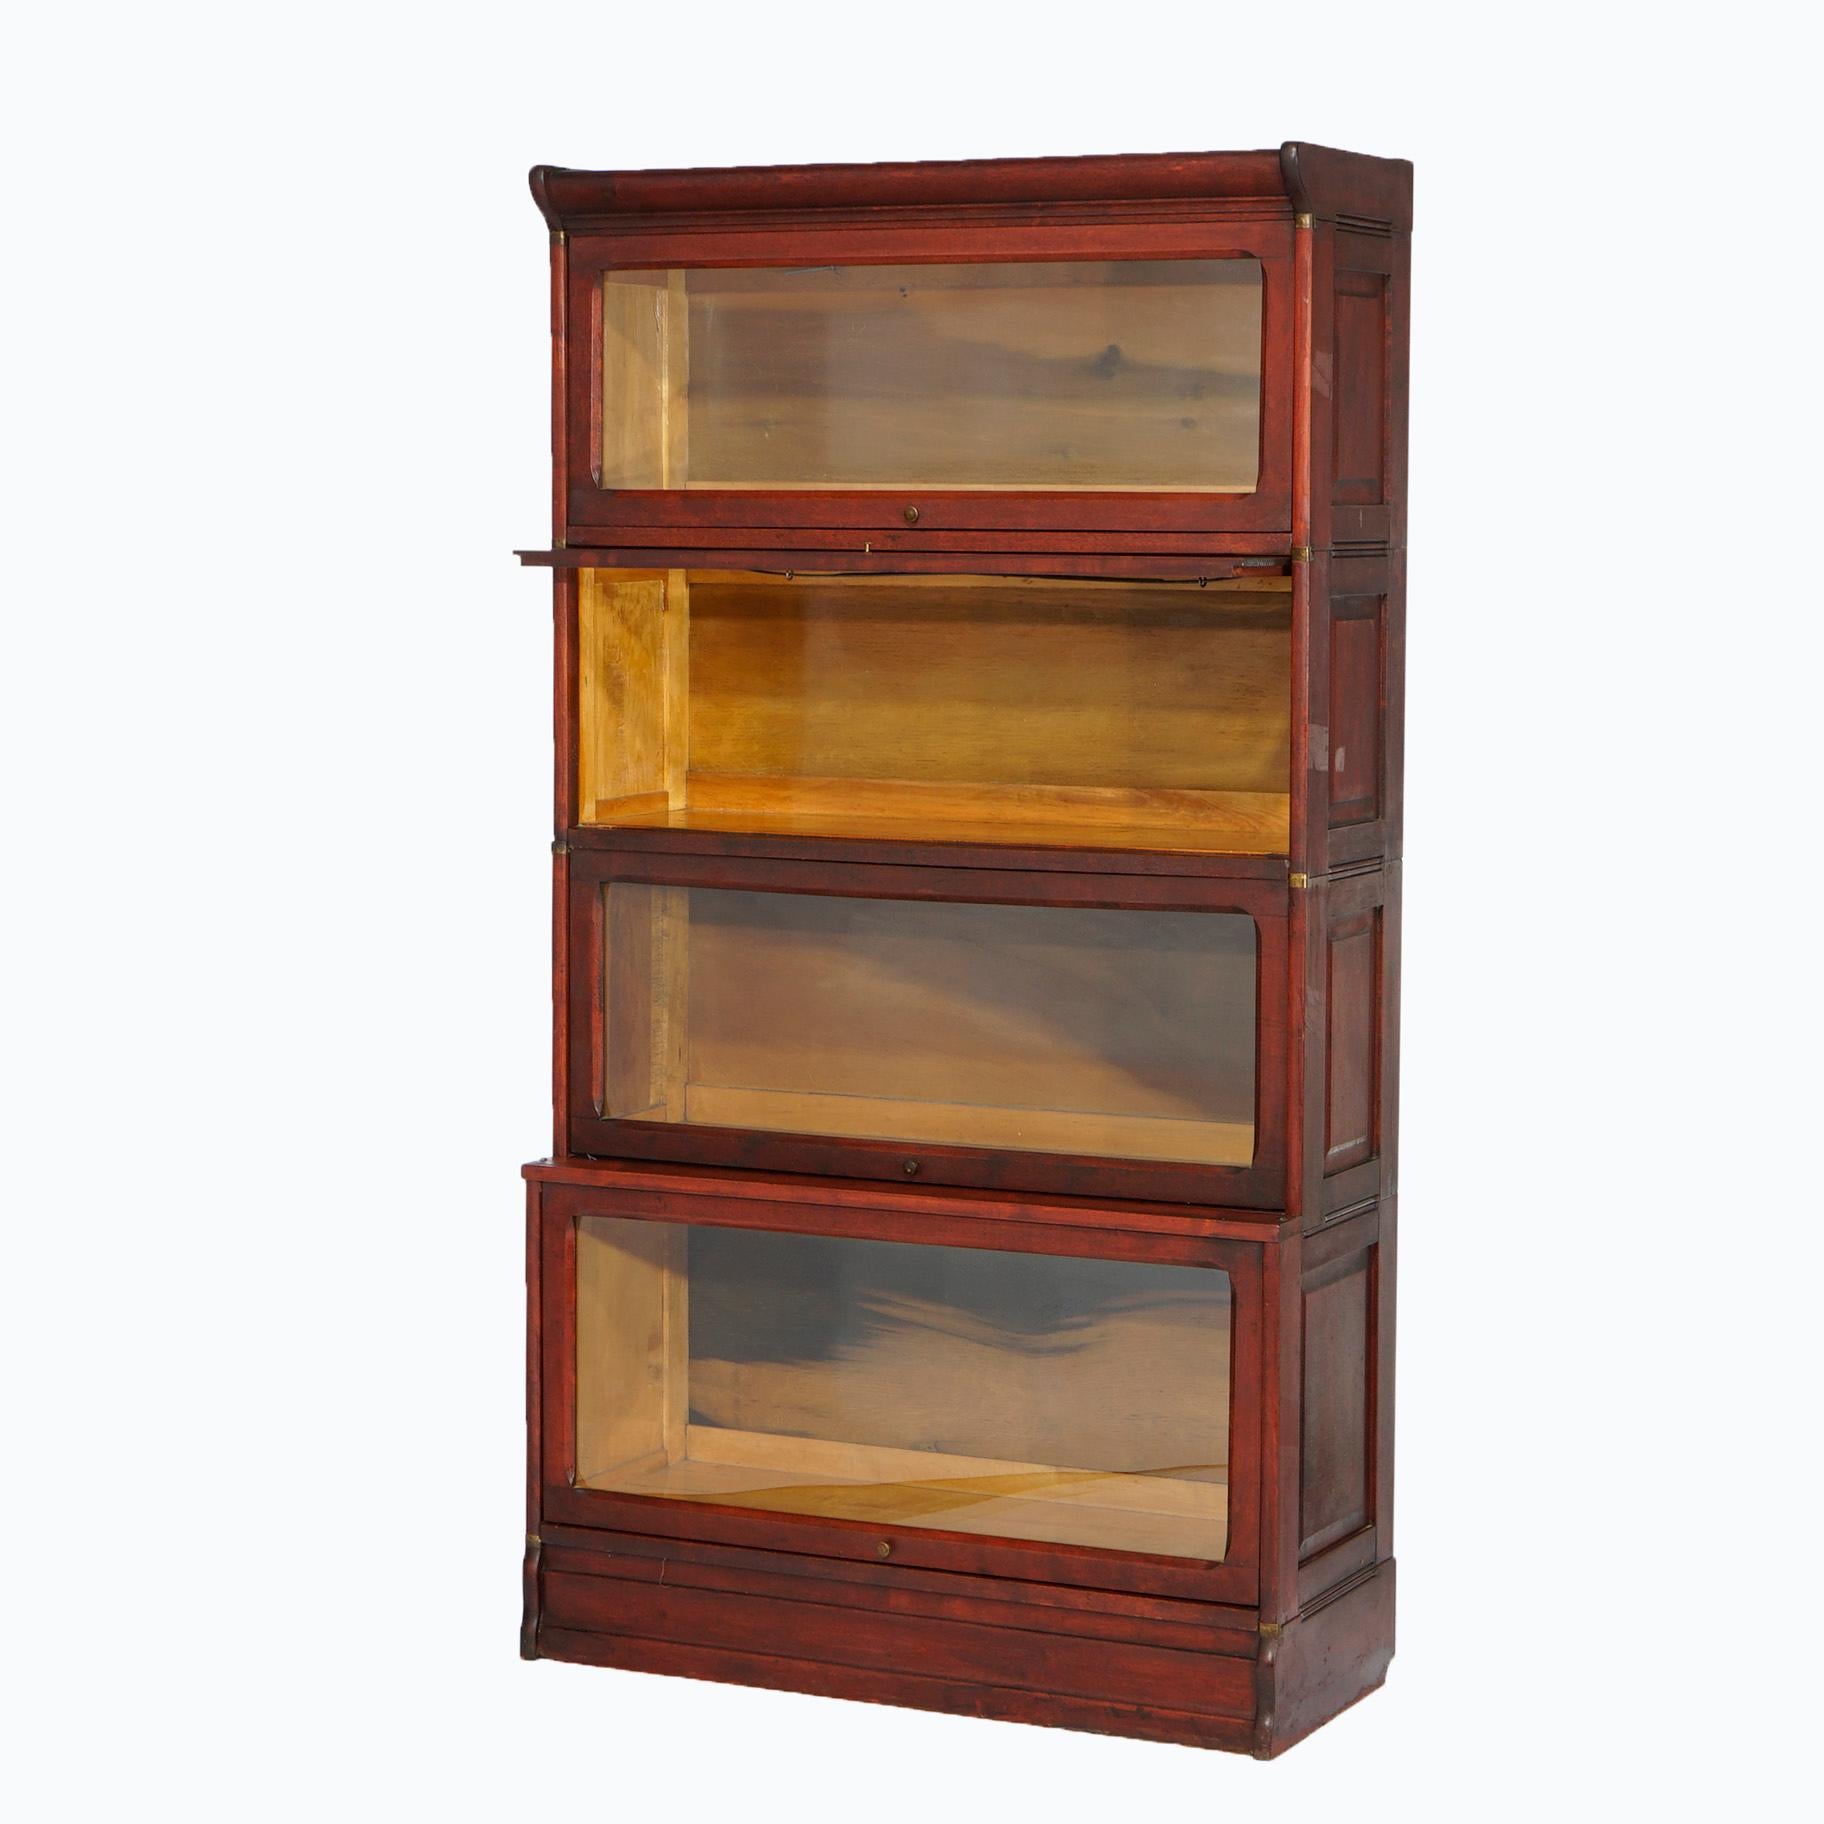 An antique Arts and Crafts barrister bookcase offers mahogany raised panel construction with four stacks having pull out glass doors, c1910

Measures- 66.25'' H x 36'' W x 14.5'' D.